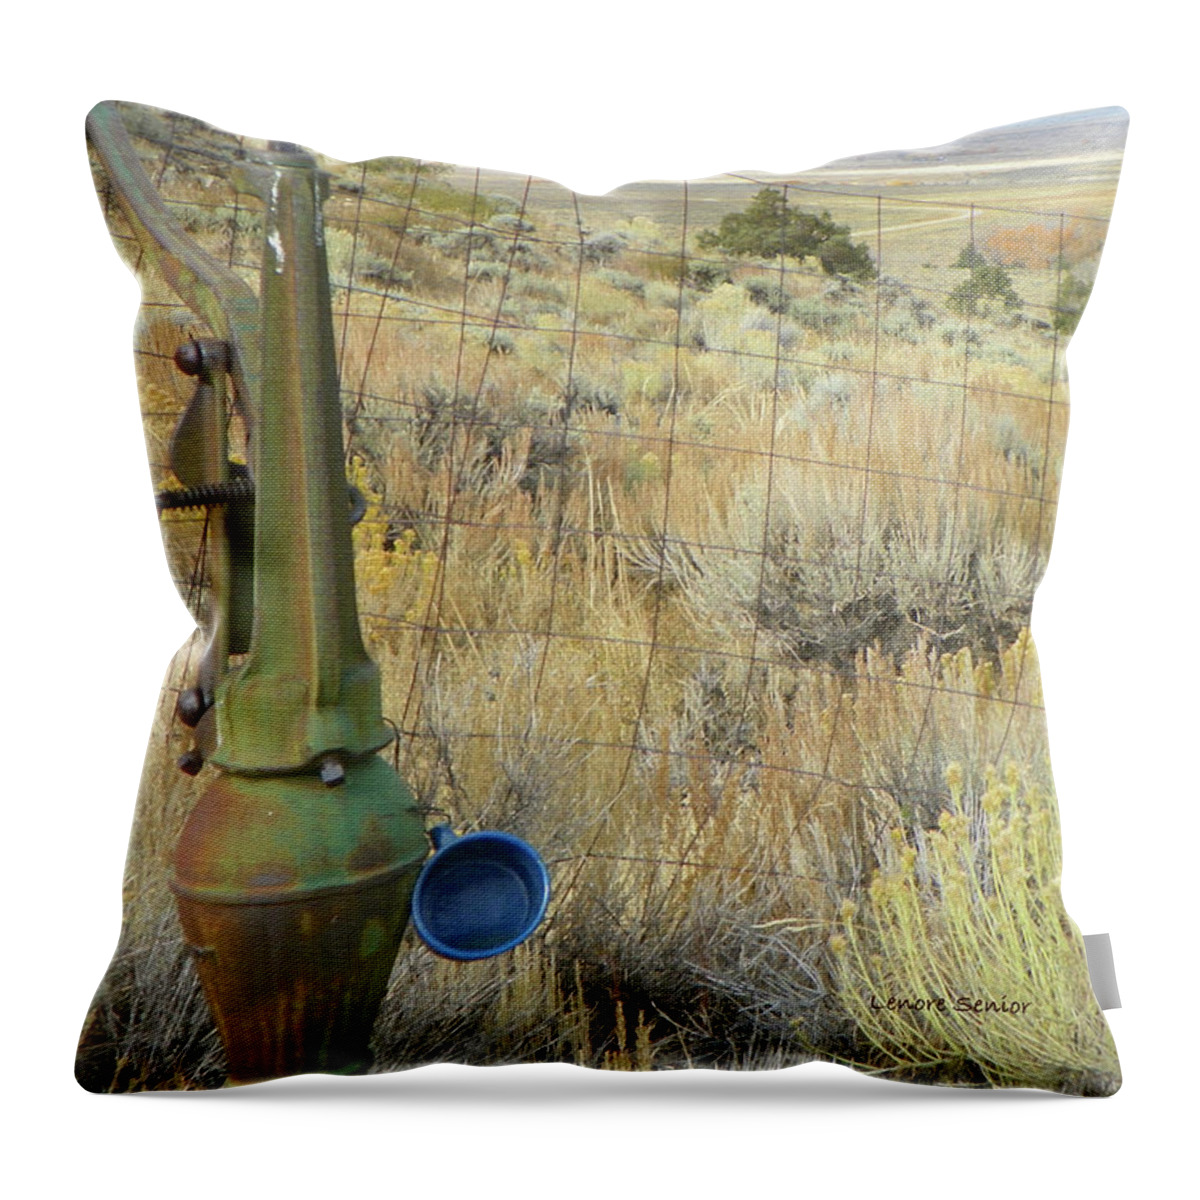 Expressive Throw Pillow featuring the photograph The Water Pump by Lenore Senior